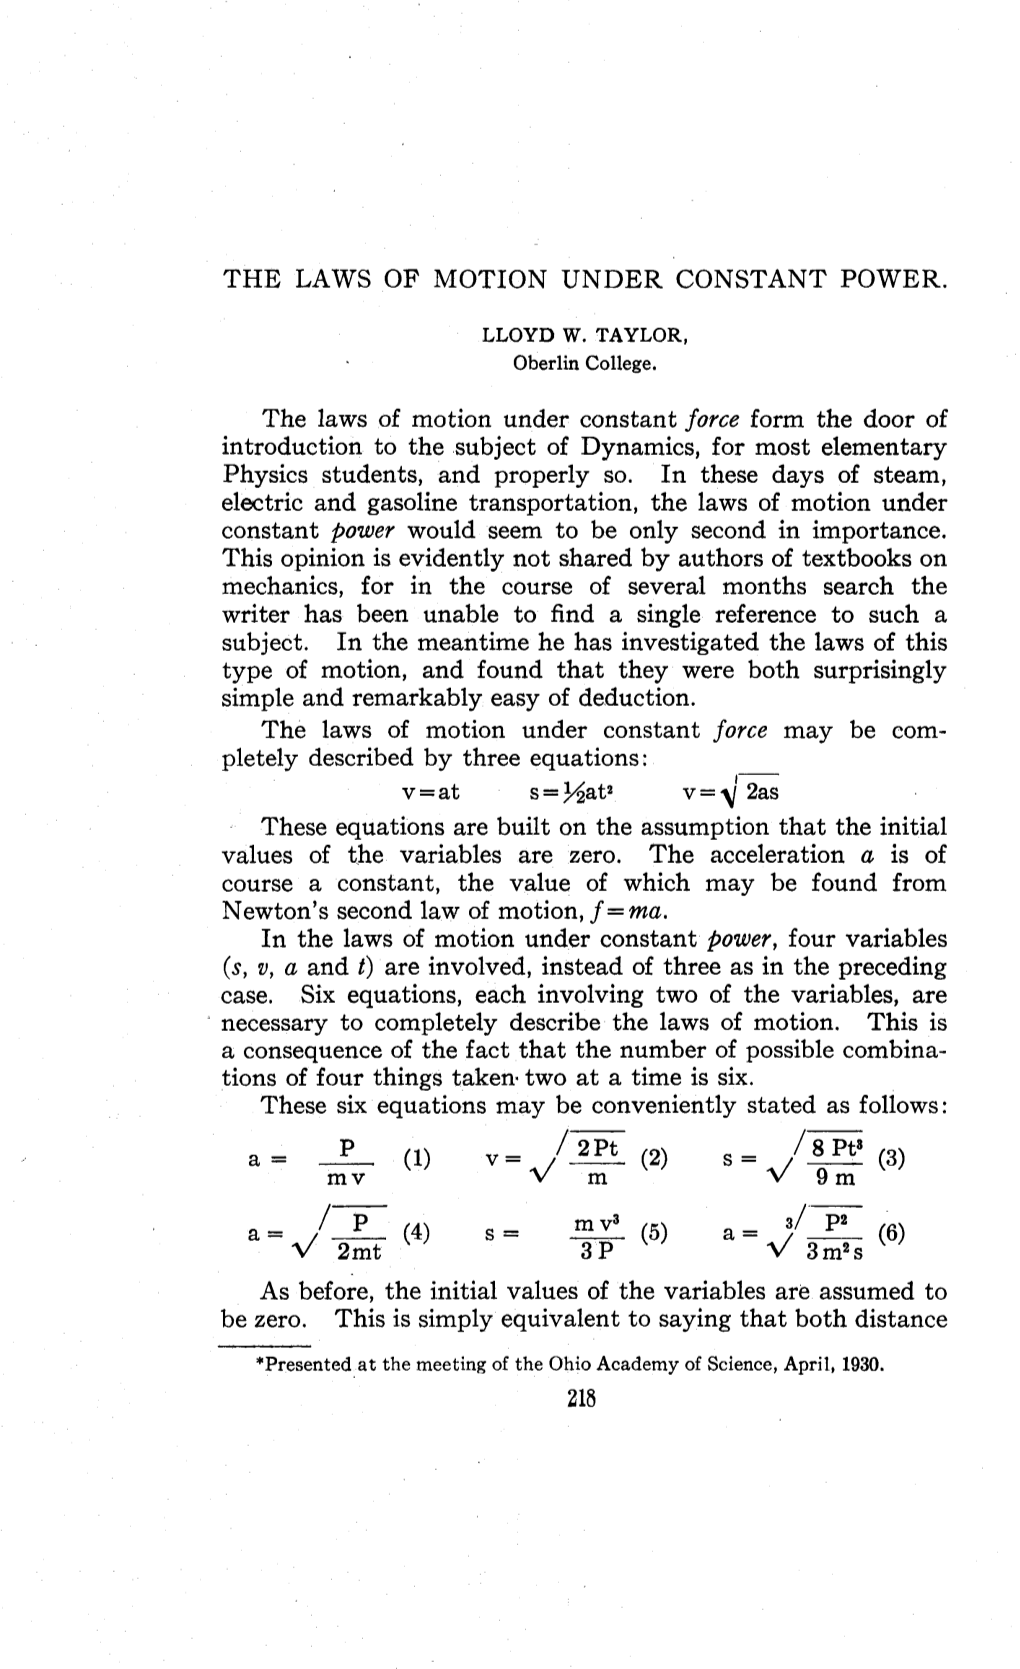 The Laws of Motion Under Constant Power